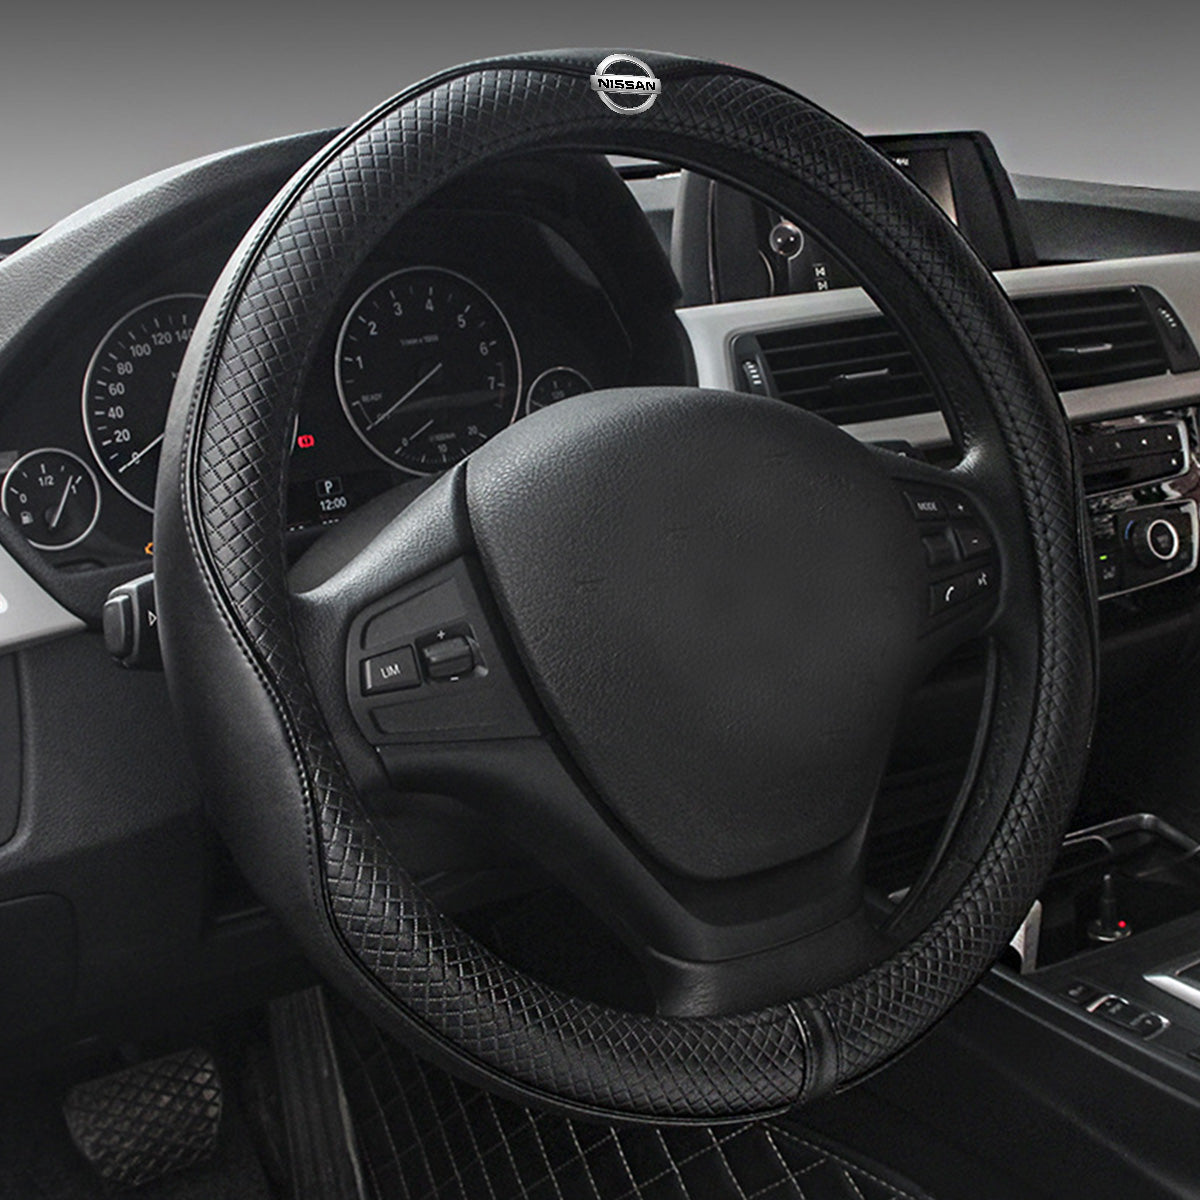 Enhance Your Ride with a Stylish Nissan Steering Wheel Cover